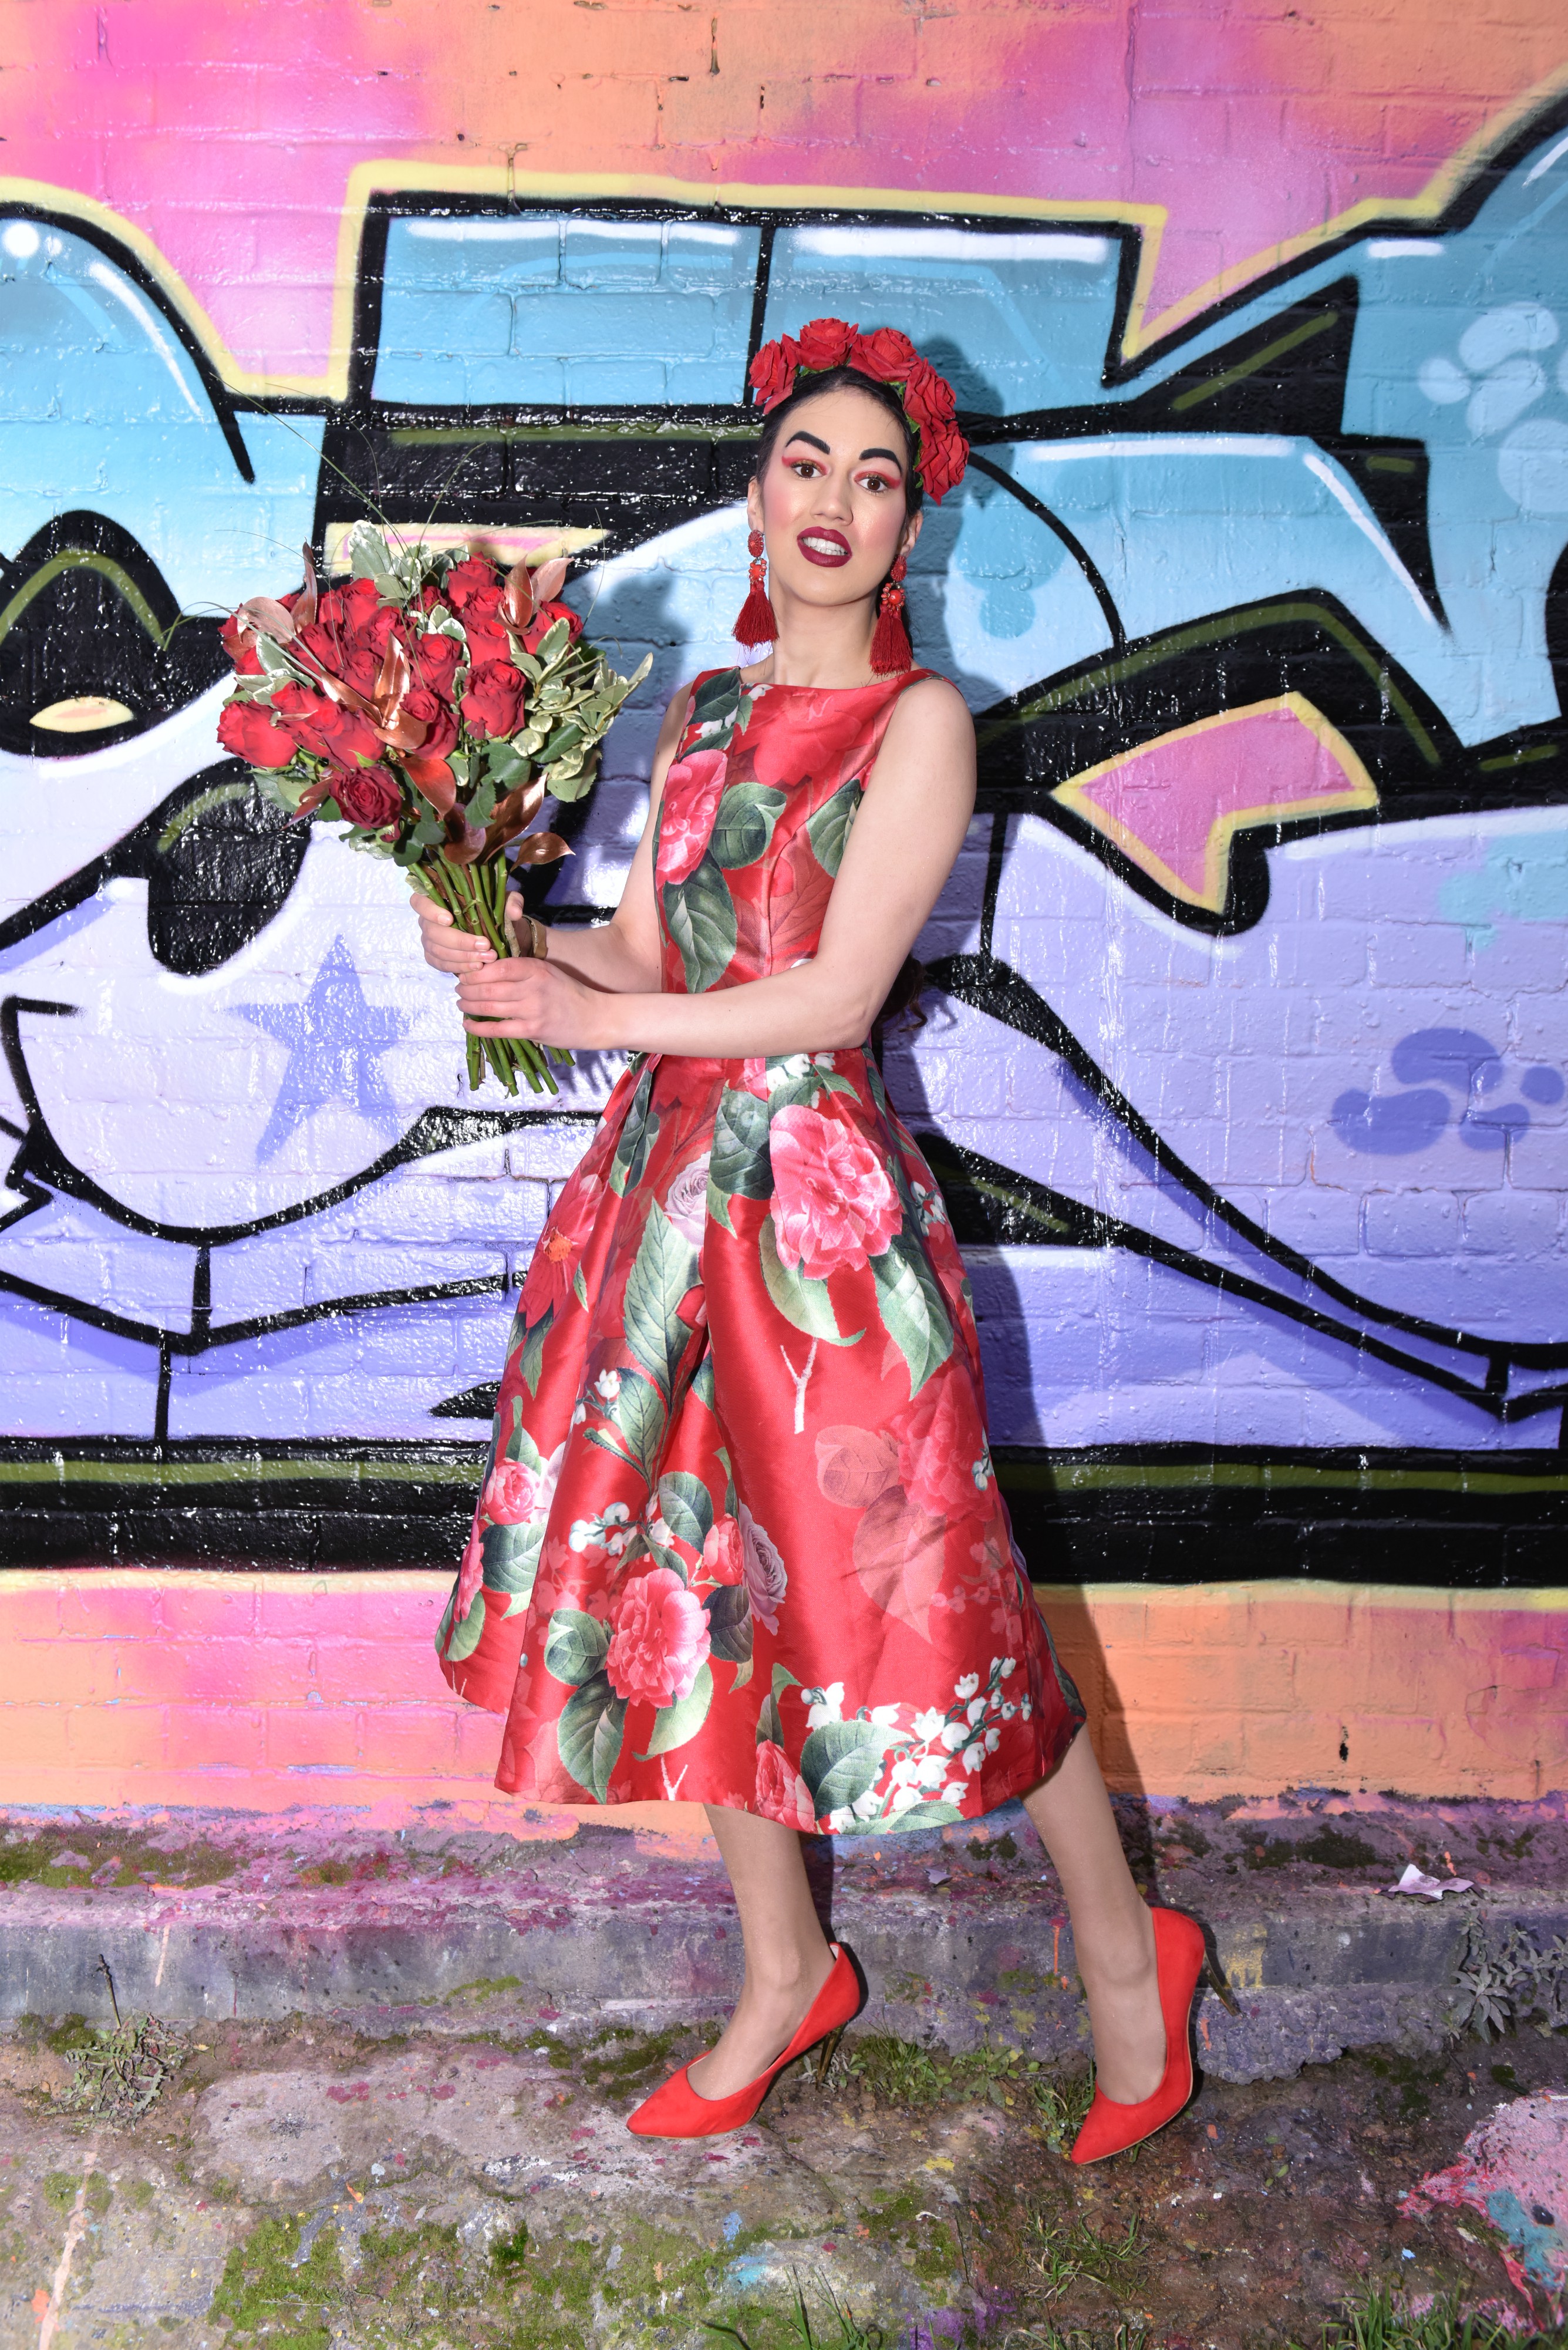 <img src="ana.jpg" alt="ana clutching red roses dating dos and don'ts"/> 